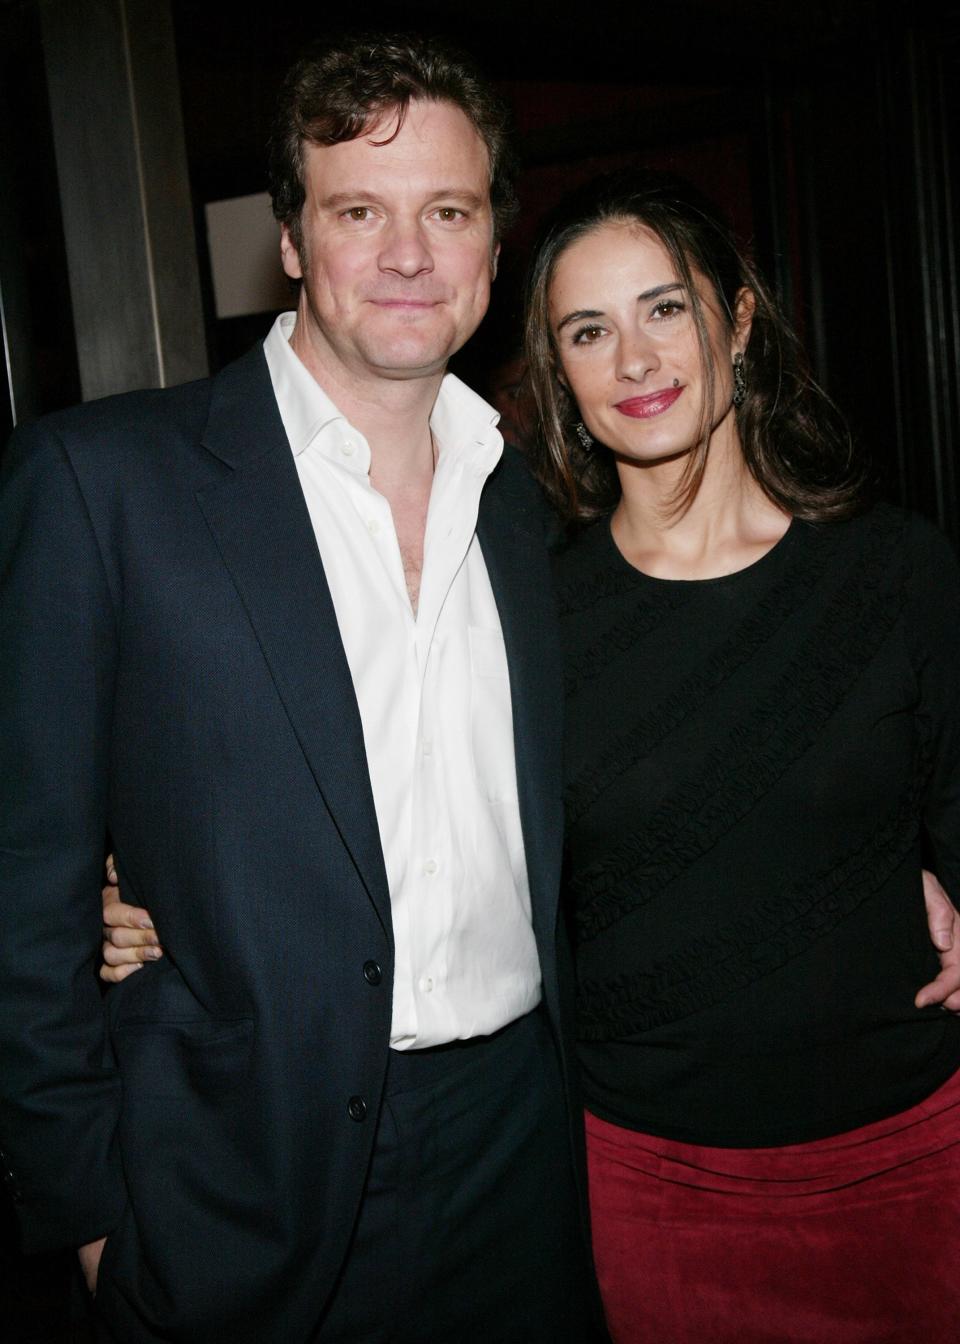 Actor Colin Firth and wife Livia attend the World Premiere of "Love Actually" at the Ziegfeld Theatre November 06, 2003 in New York City.